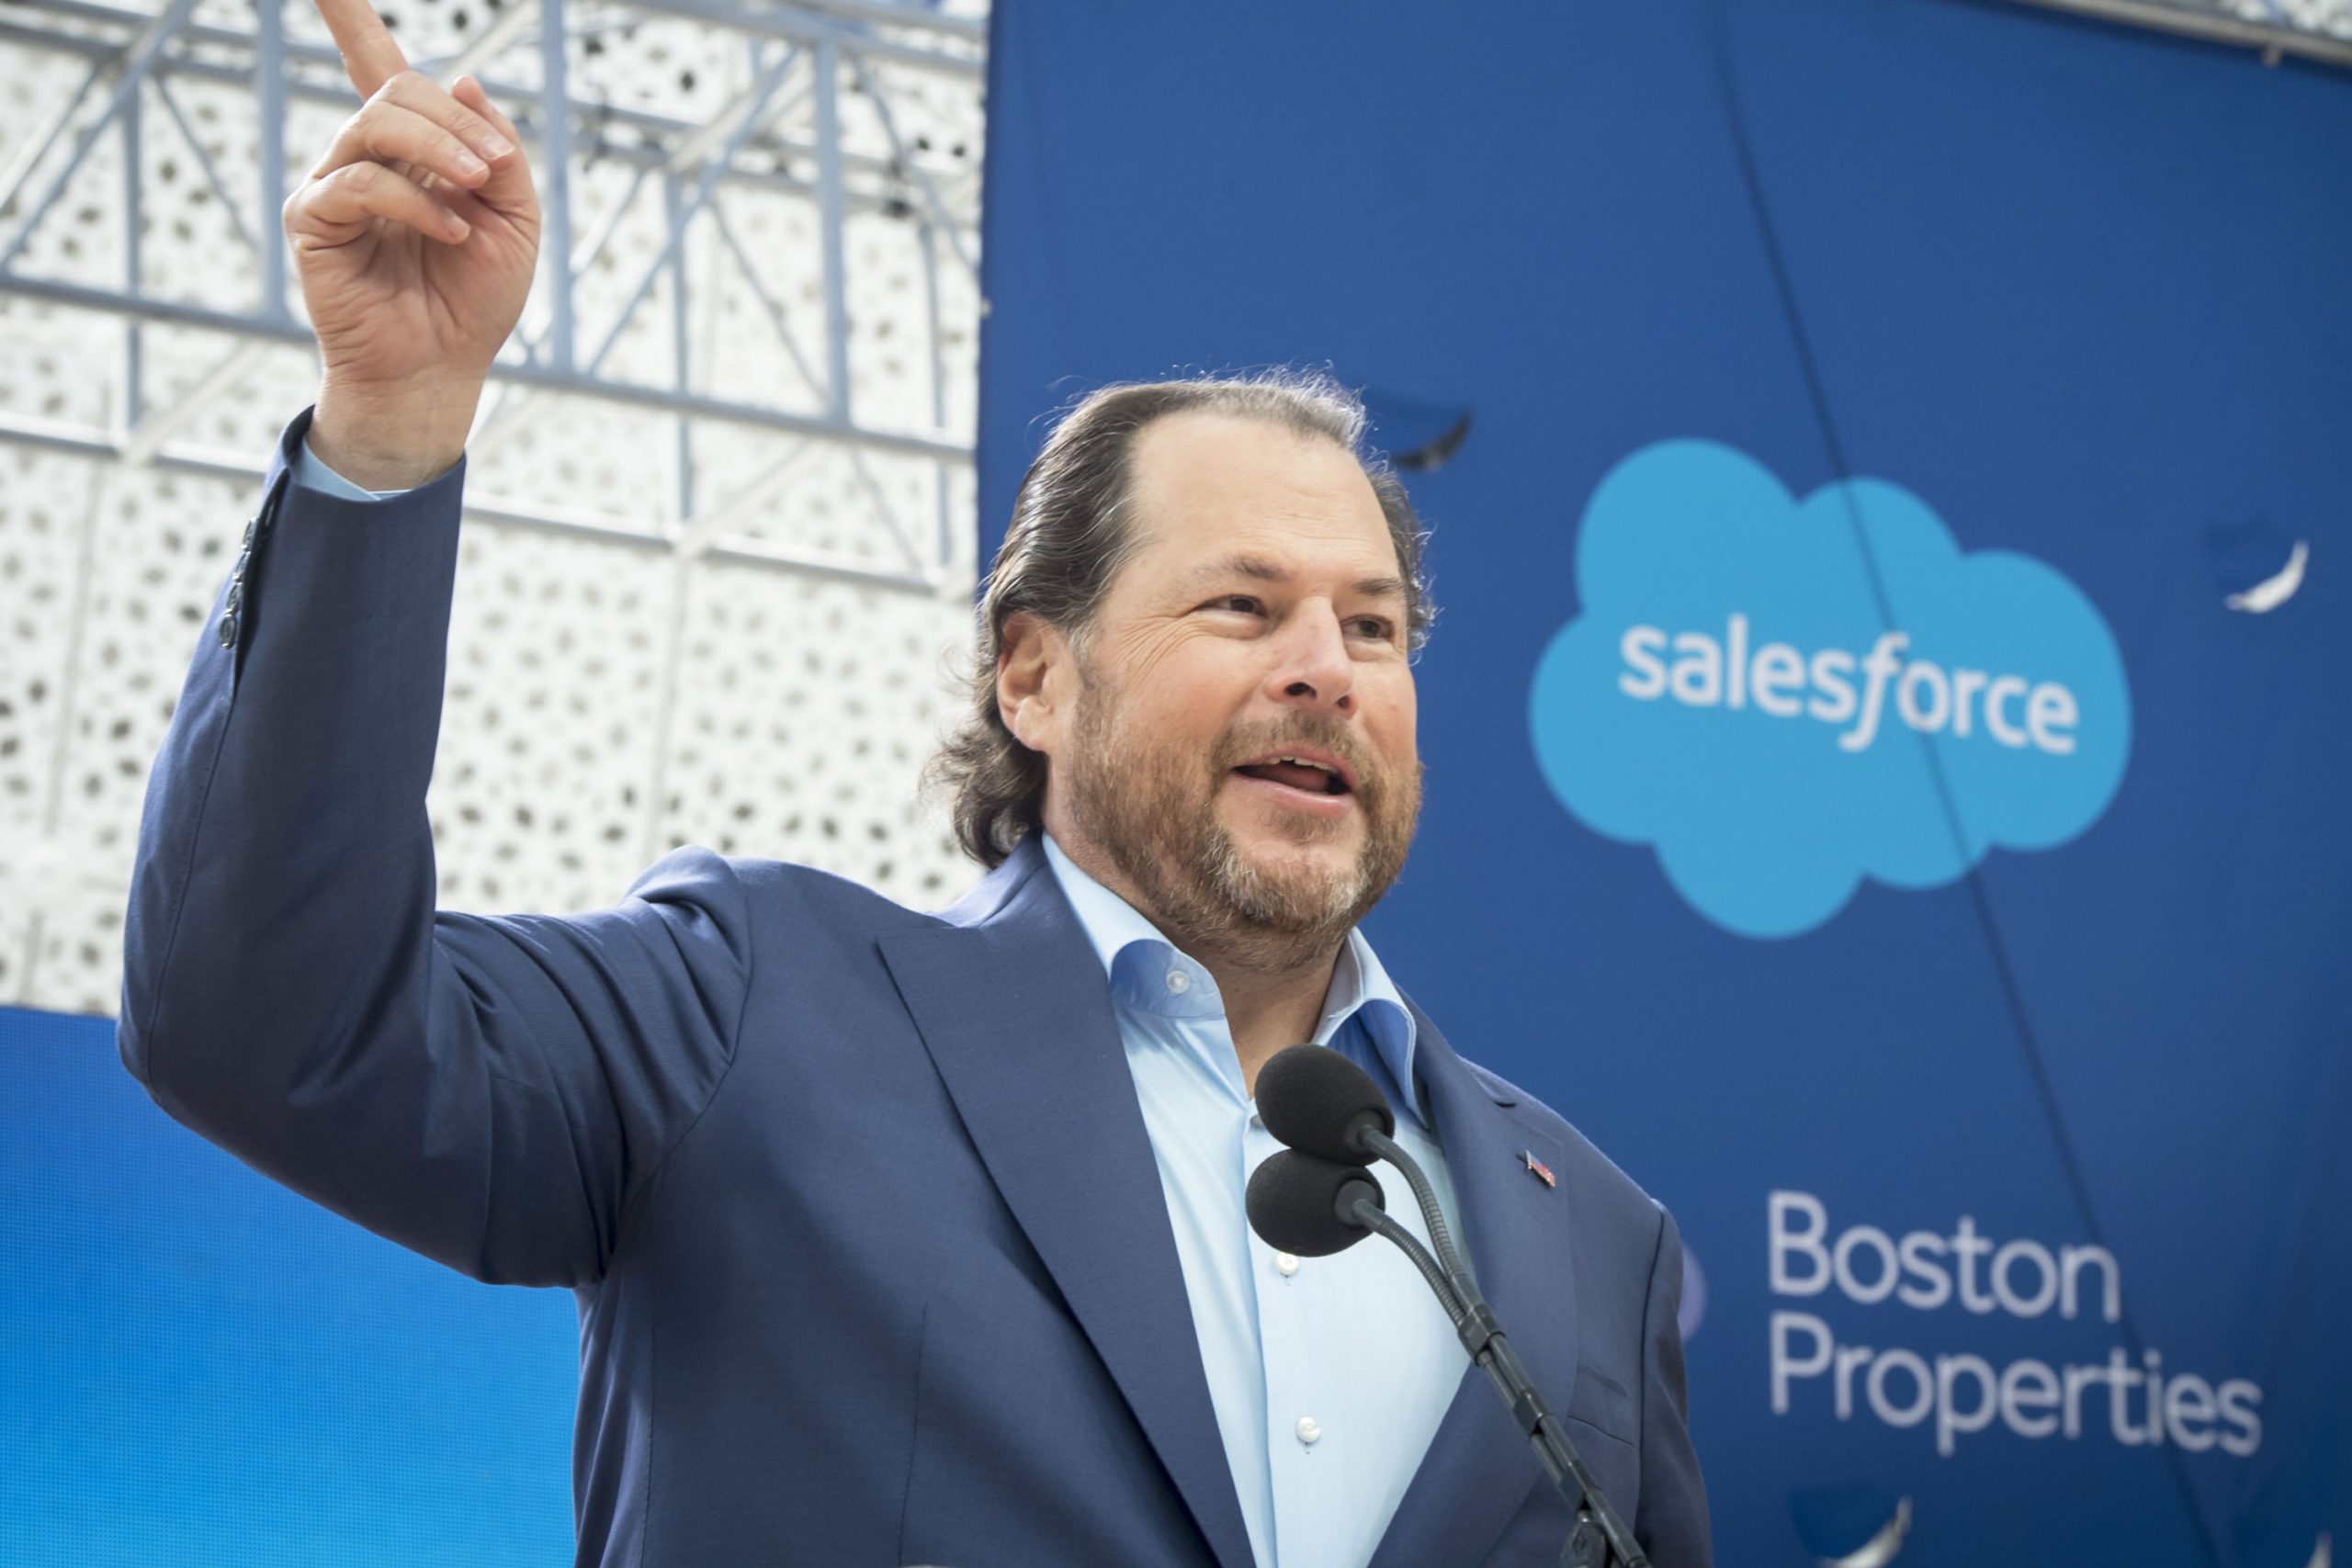 Salesforce expands its Work.com apps to help distribute the vaccine